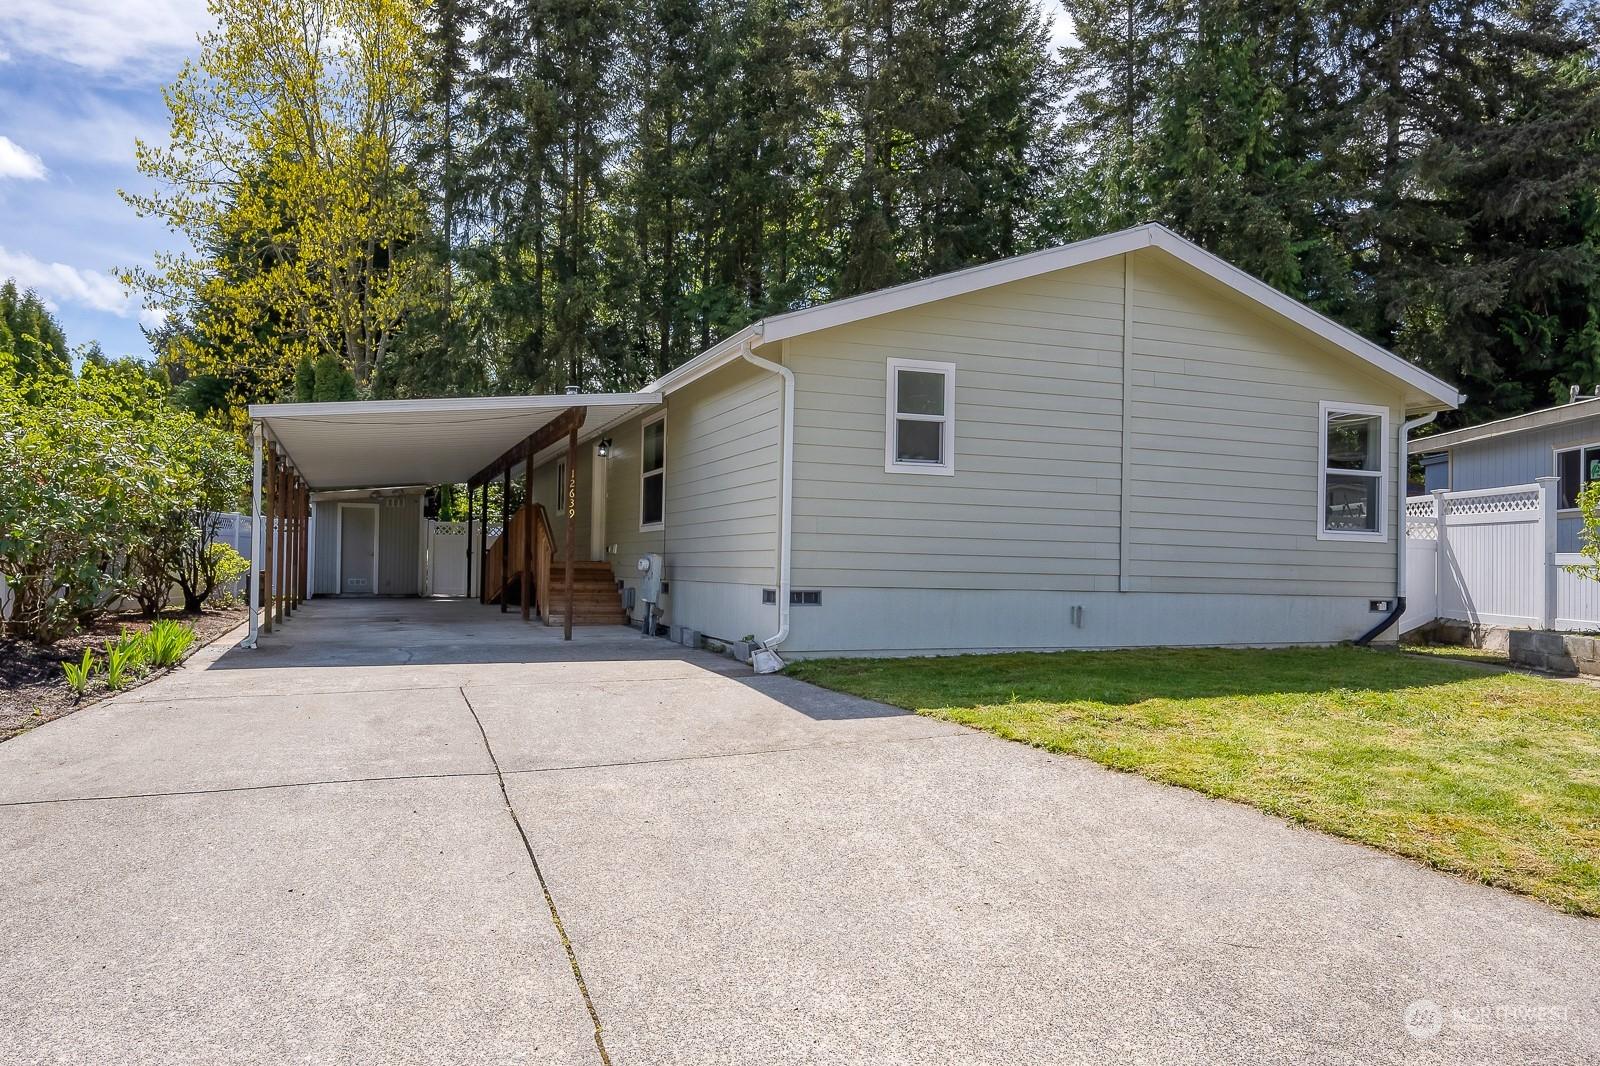 12639 194TH STREET, BOTHELL, Washington, 98011, United States, 3 Bedrooms Bedrooms, ,2 BathroomsBathrooms,Residential,For Sale,12639 194TH STREET,1521681